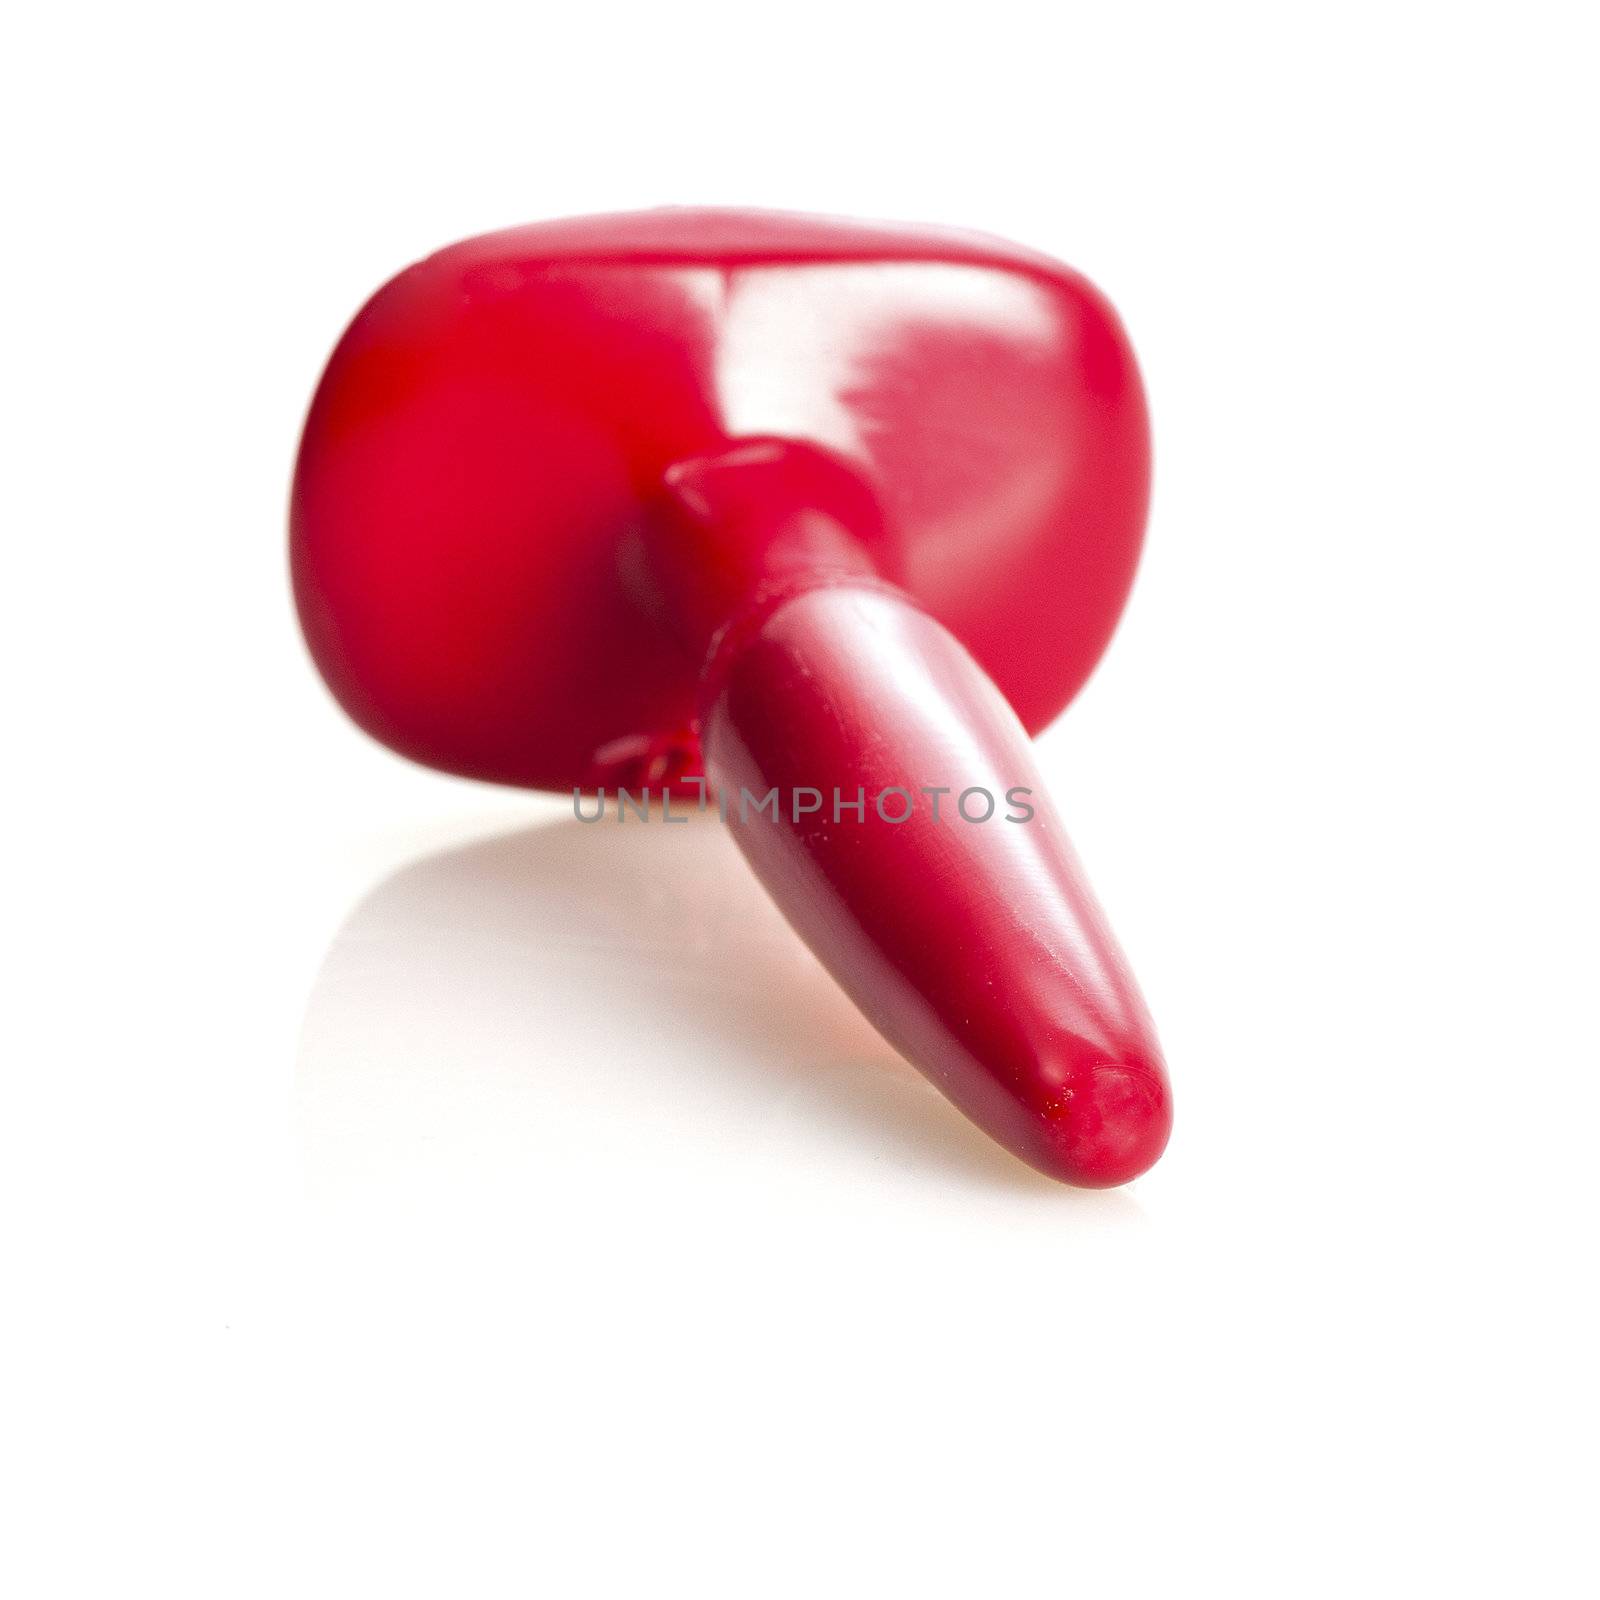 Erotic toys:  Anal plug in red by stockbymh